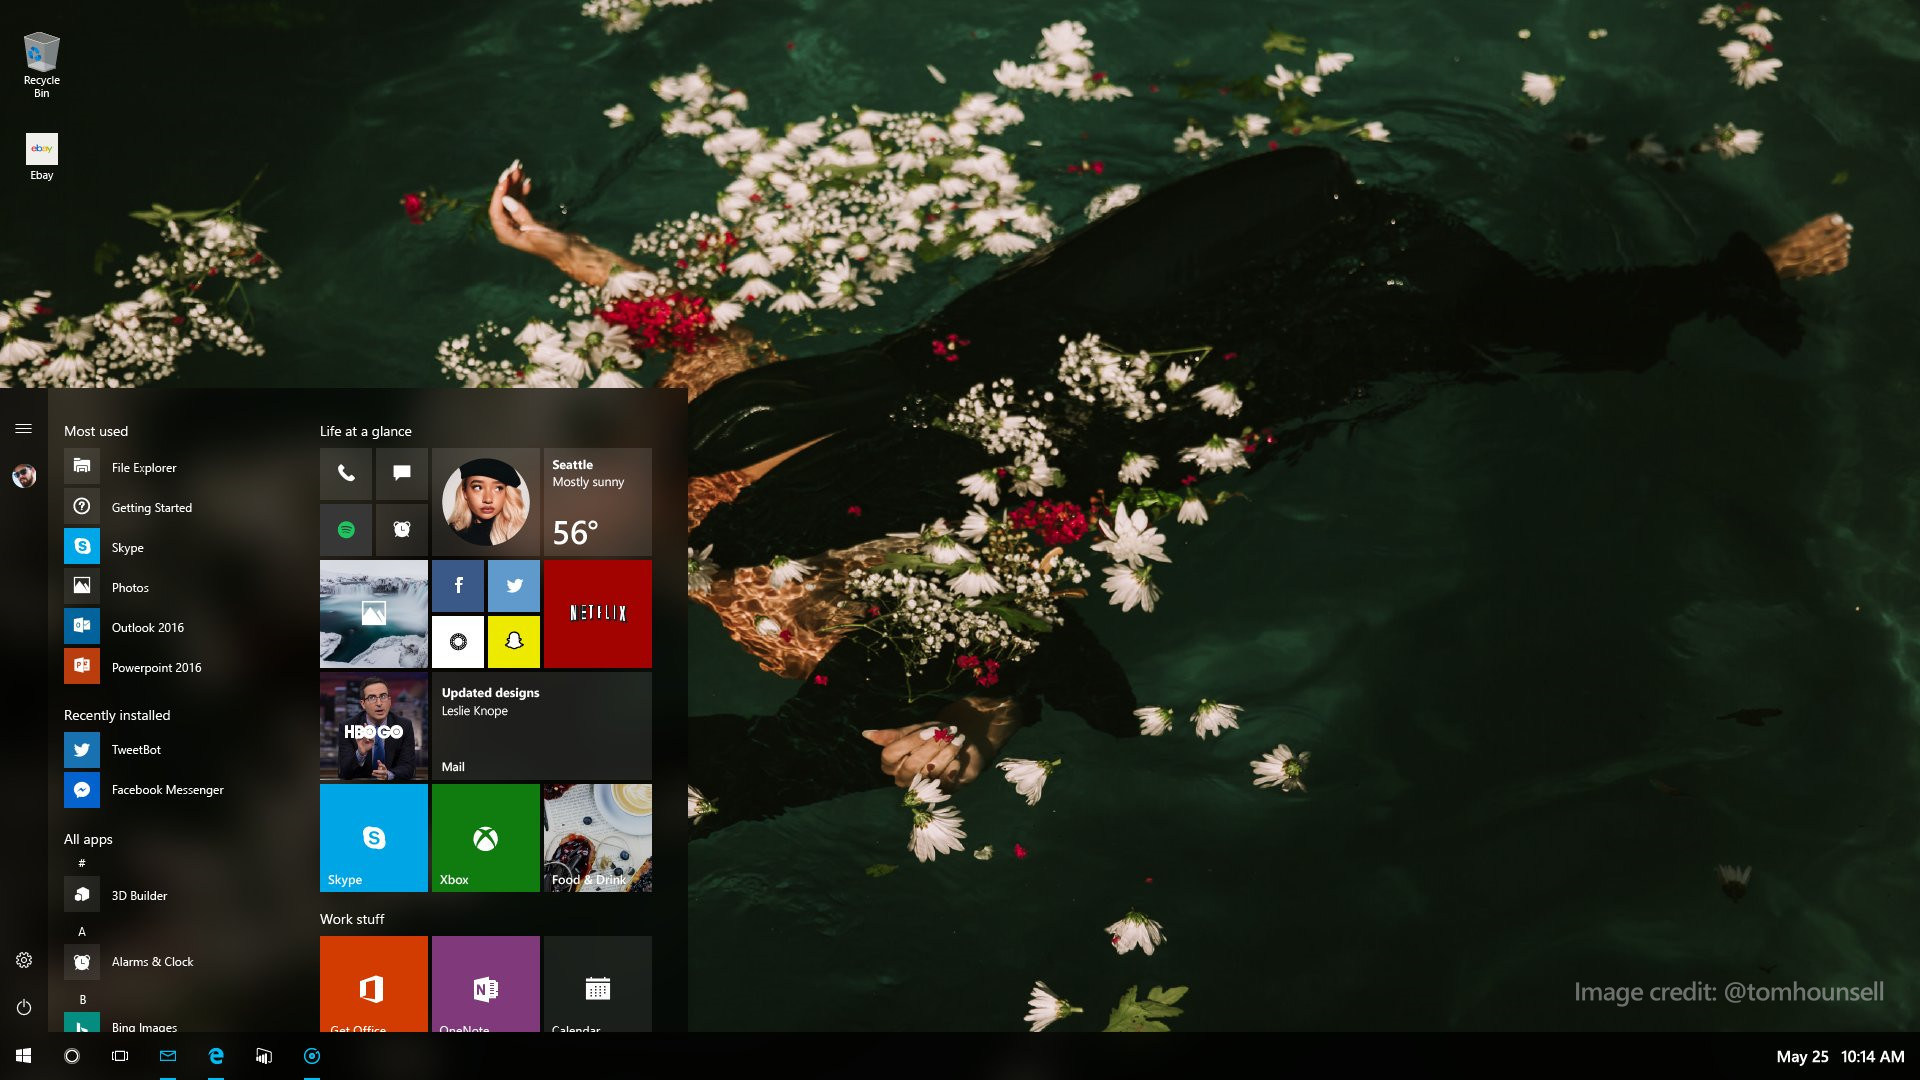 1920x1080 Transparent Live Tiles aren't new to Windows 10 on phones, but the Start  menu on PCs currently restricts all tiles to full opacity. On Windows 10  PCs, ...